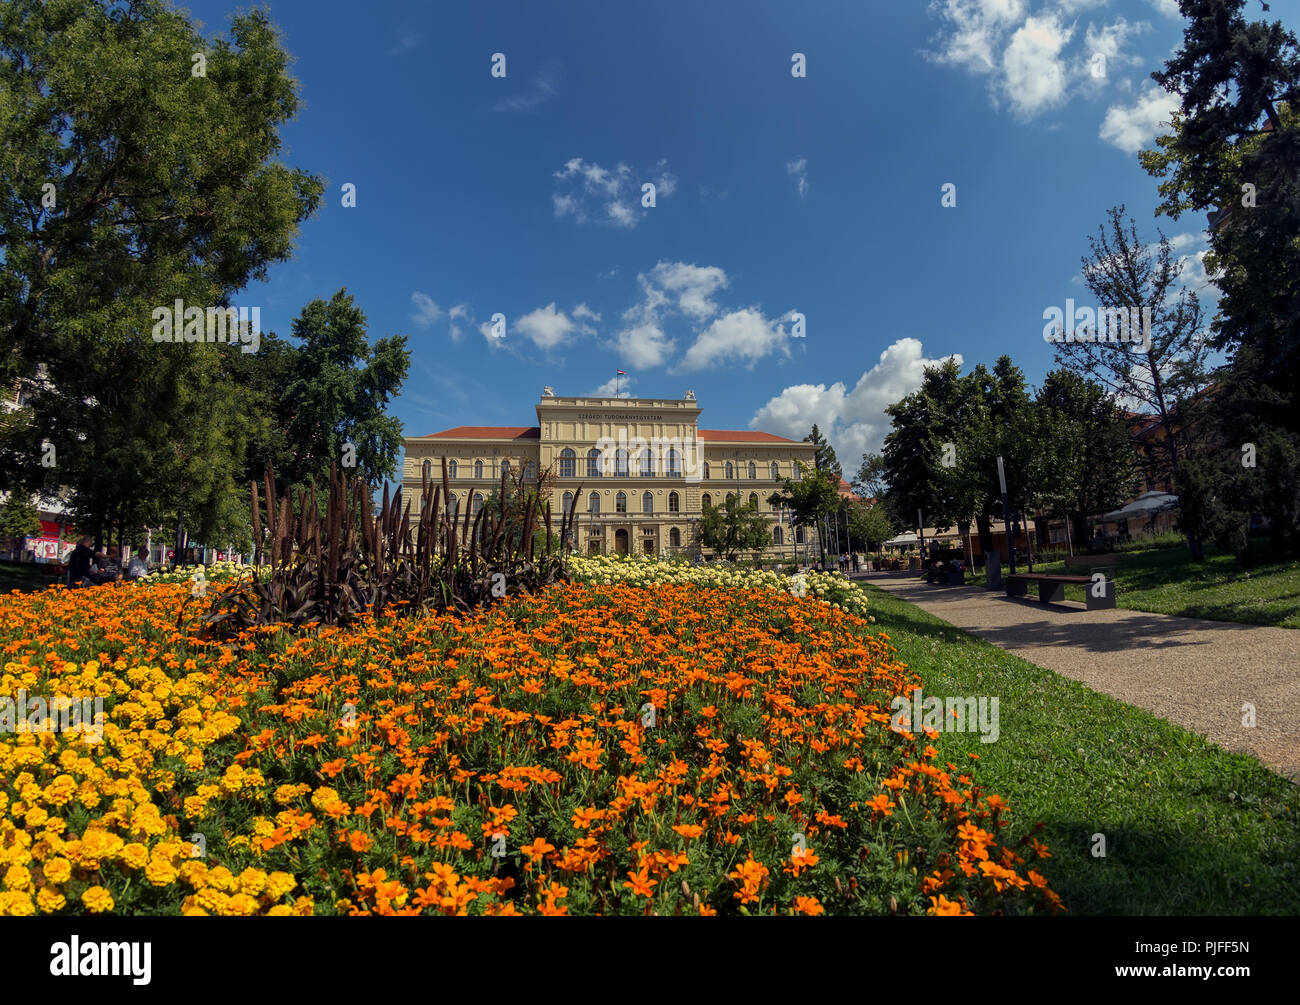 The Szeged University on the Dugonics square in the downtown of Szeged. It is one of Hungary's most important universities. Stock Photo